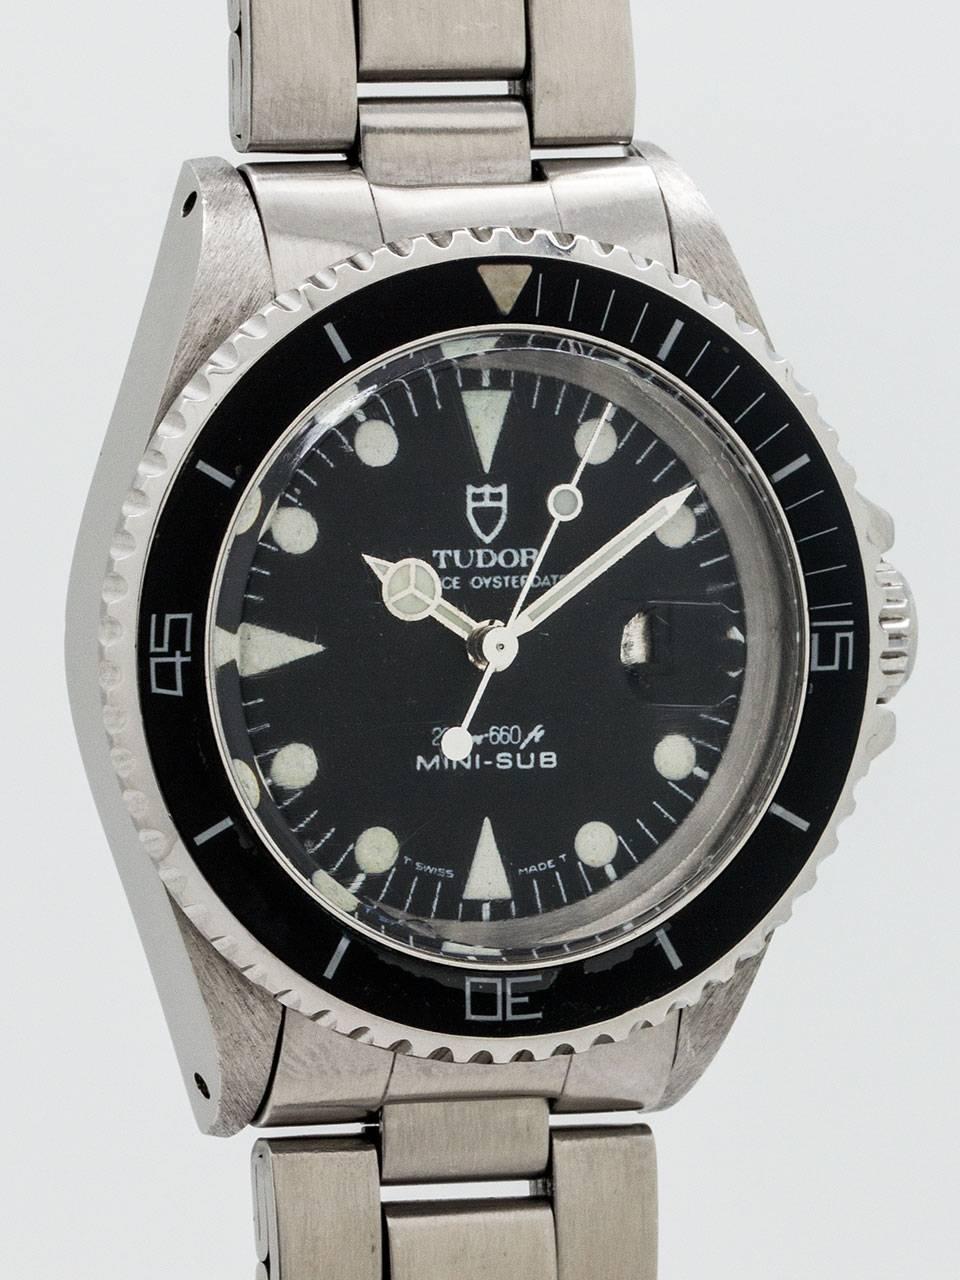 Tudor Mini-Sub ref 9440 serial #194xxx circa 1987. 33 x 39mm stainless steel case with elapsed time bezel and acrylic crystal. Original matte black dial with luminous indexes and mercedes style hands. Dial signed with Tudor Shield, Tudor Prince